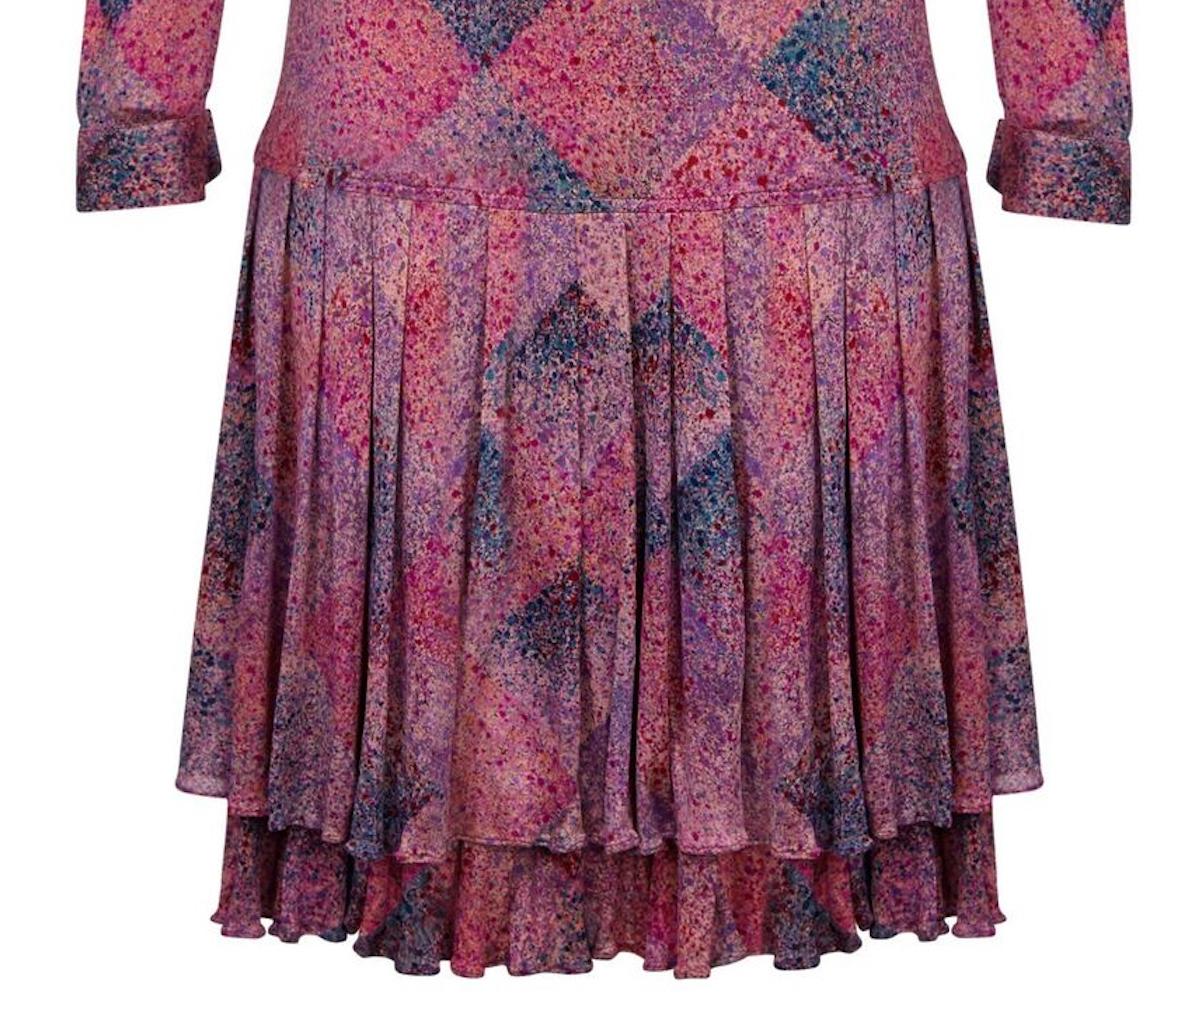 Missoni 1970s Silk Harlequin Paint Effect Dress In Excellent Condition For Sale In London, GB